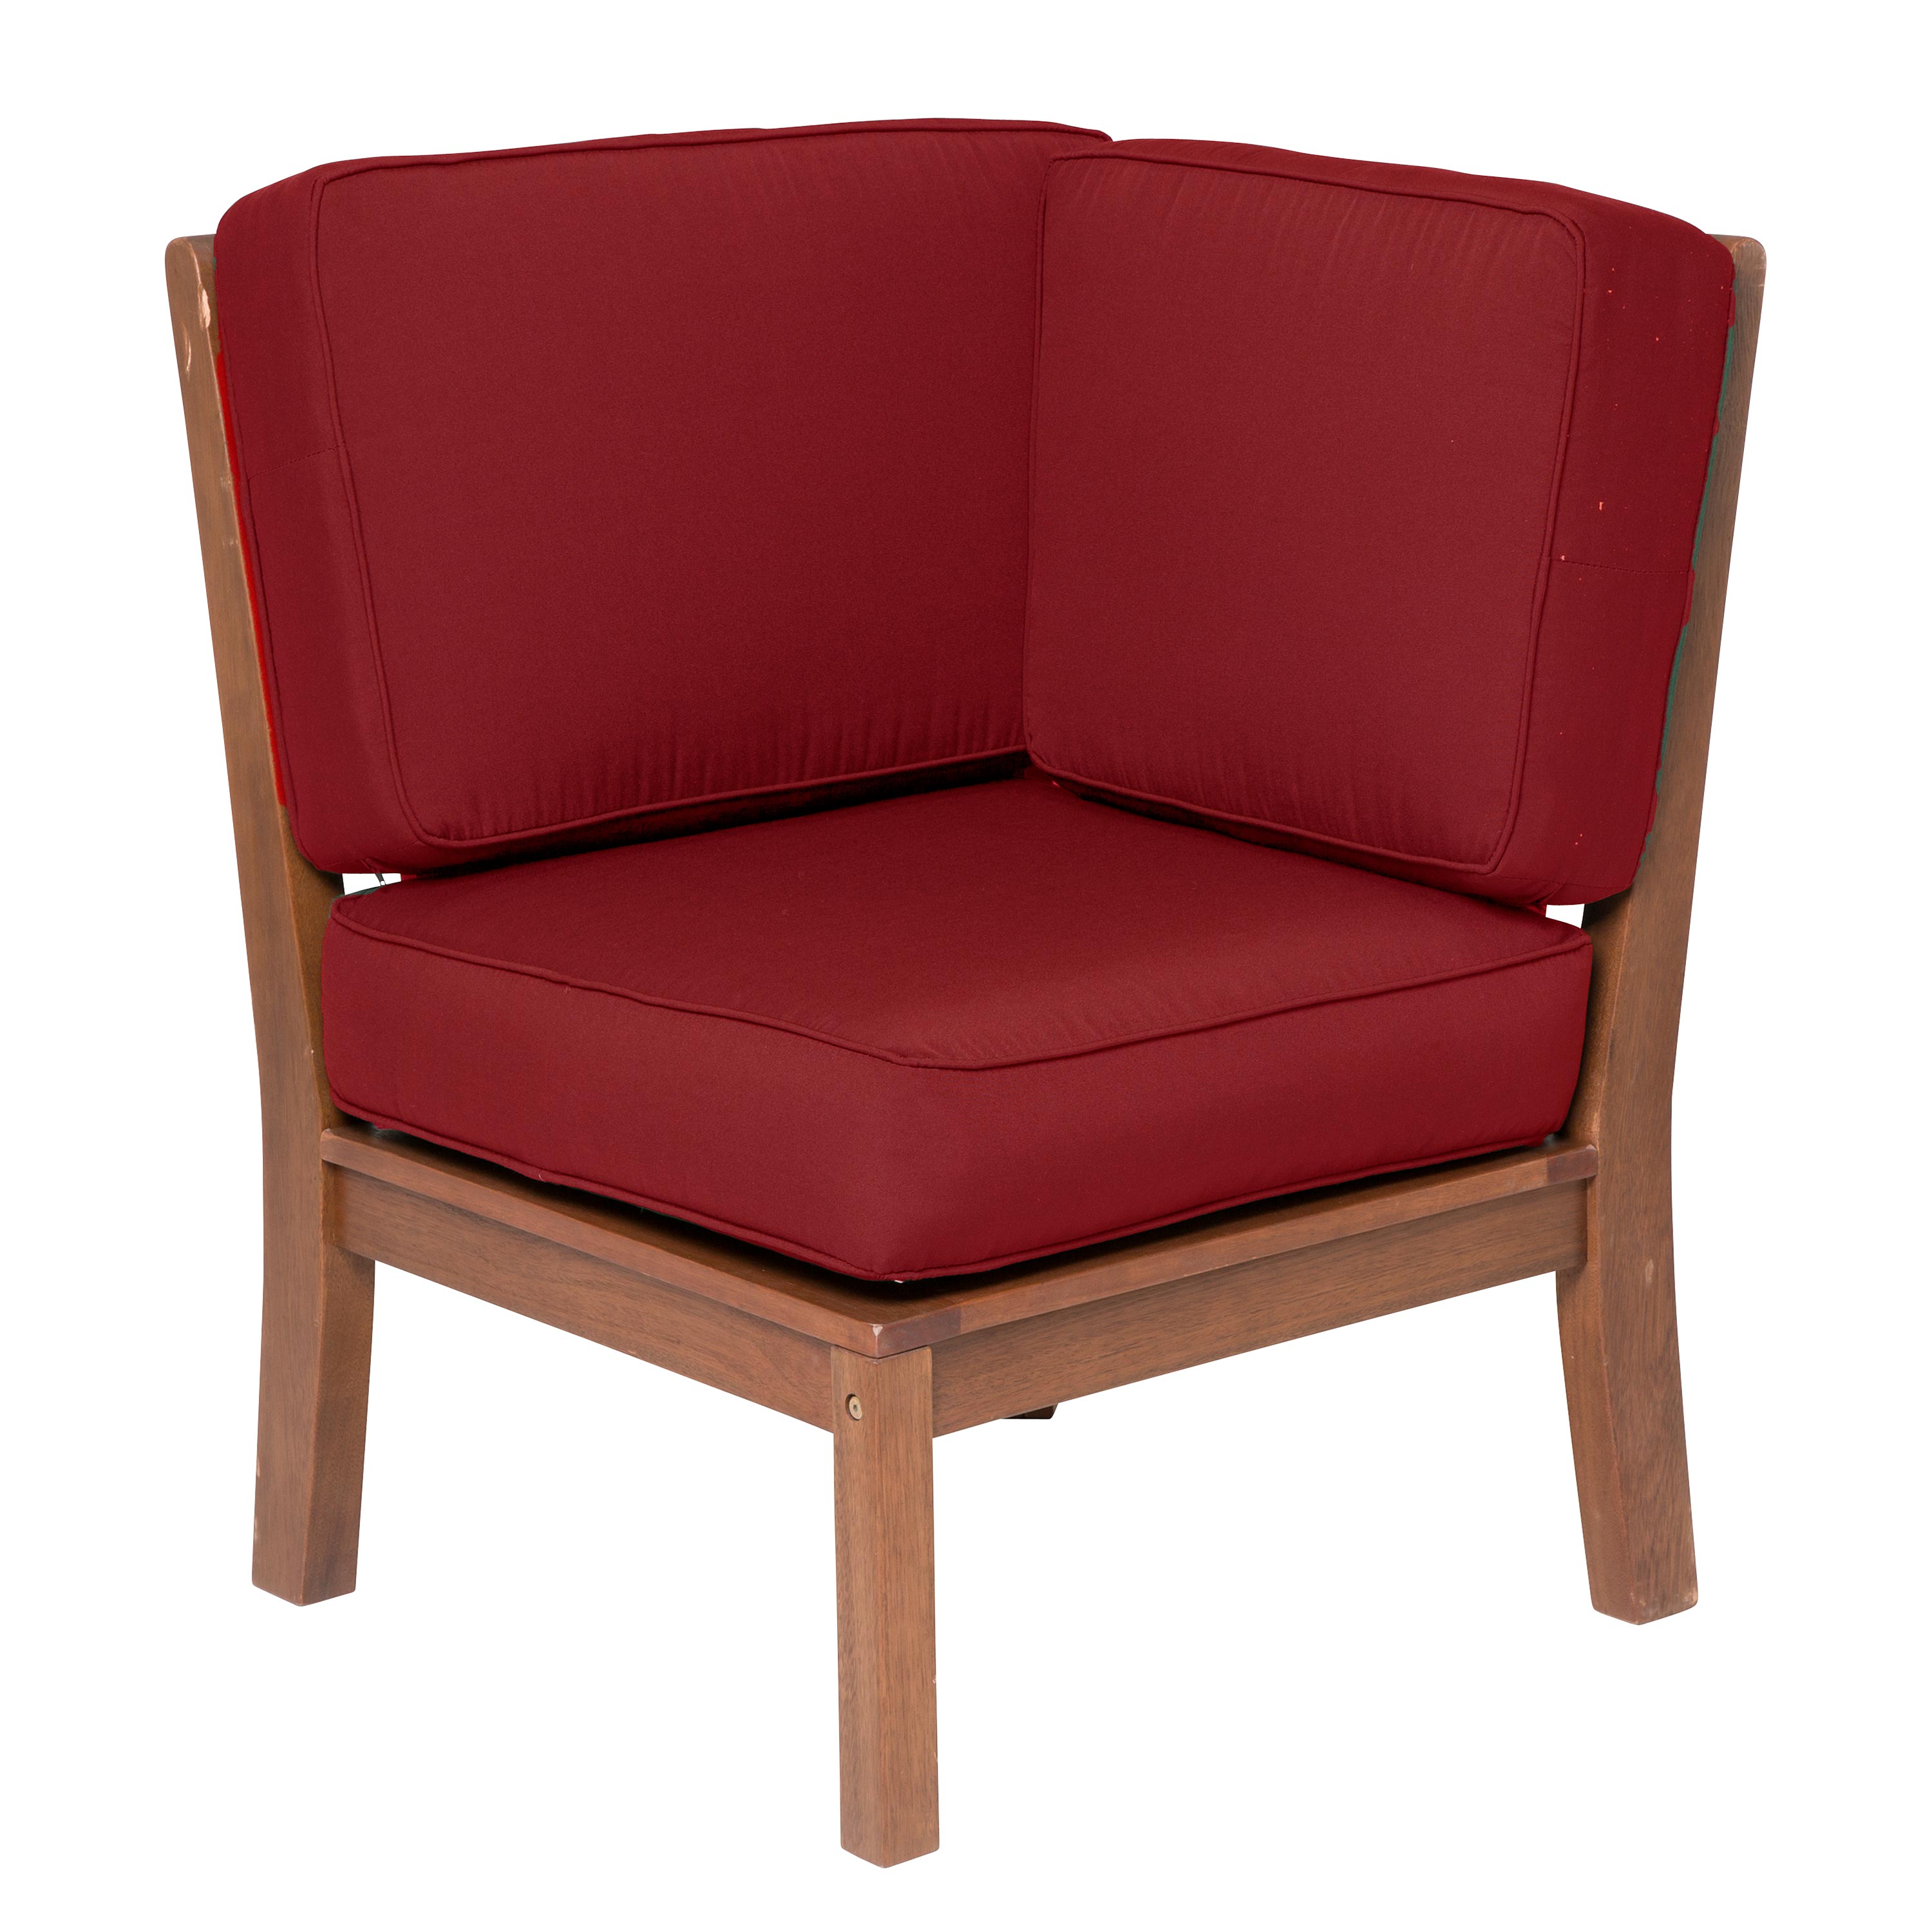 Claremont Sectional Chair with Right Arm with Cushions